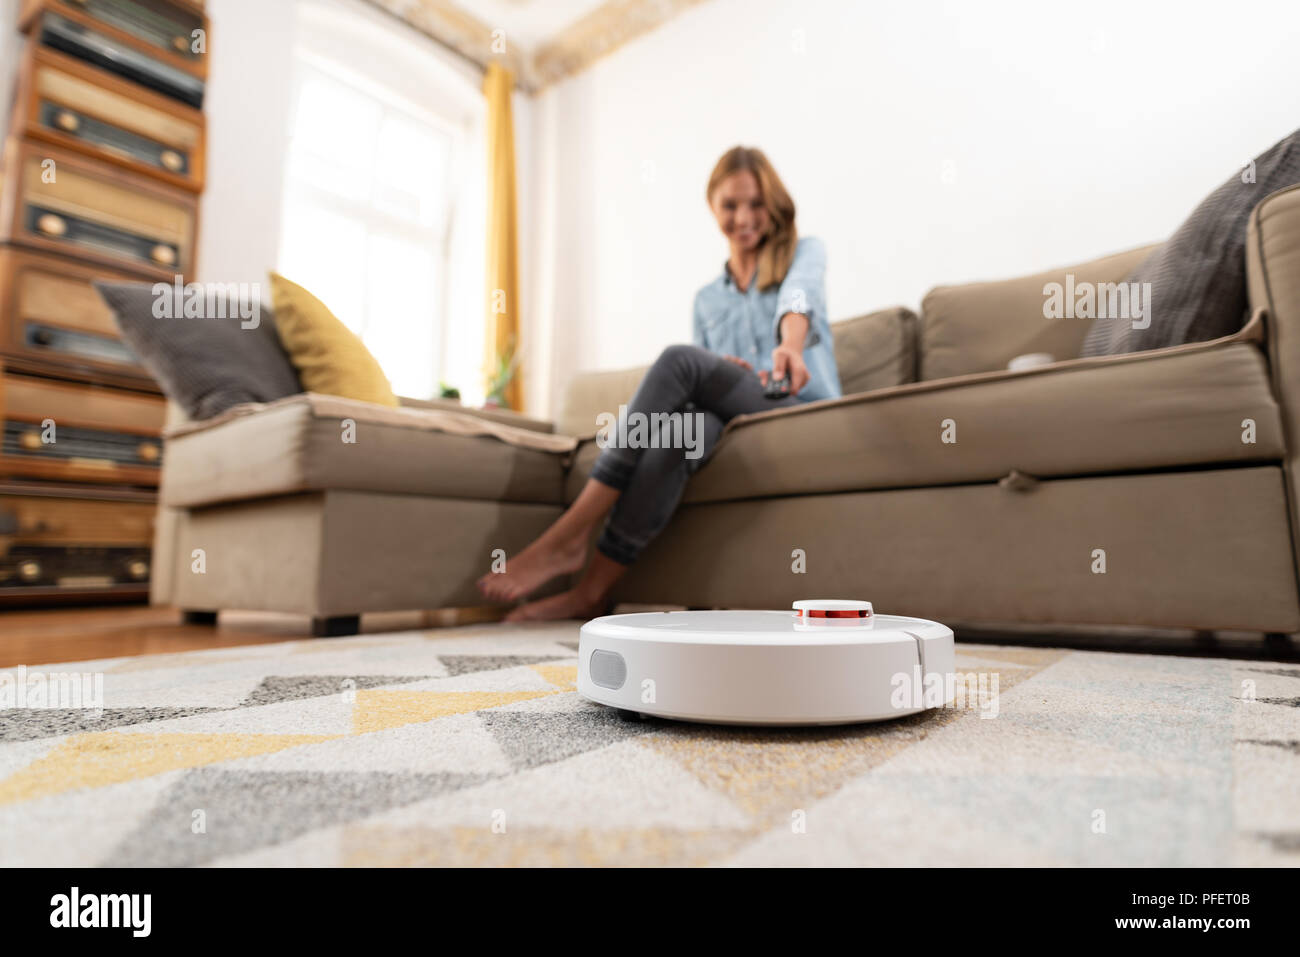 Robotic vacuum cleaner cleaning the room while woman sitting on sofa. Woman controlling vacuum with remote control. Stock Photo